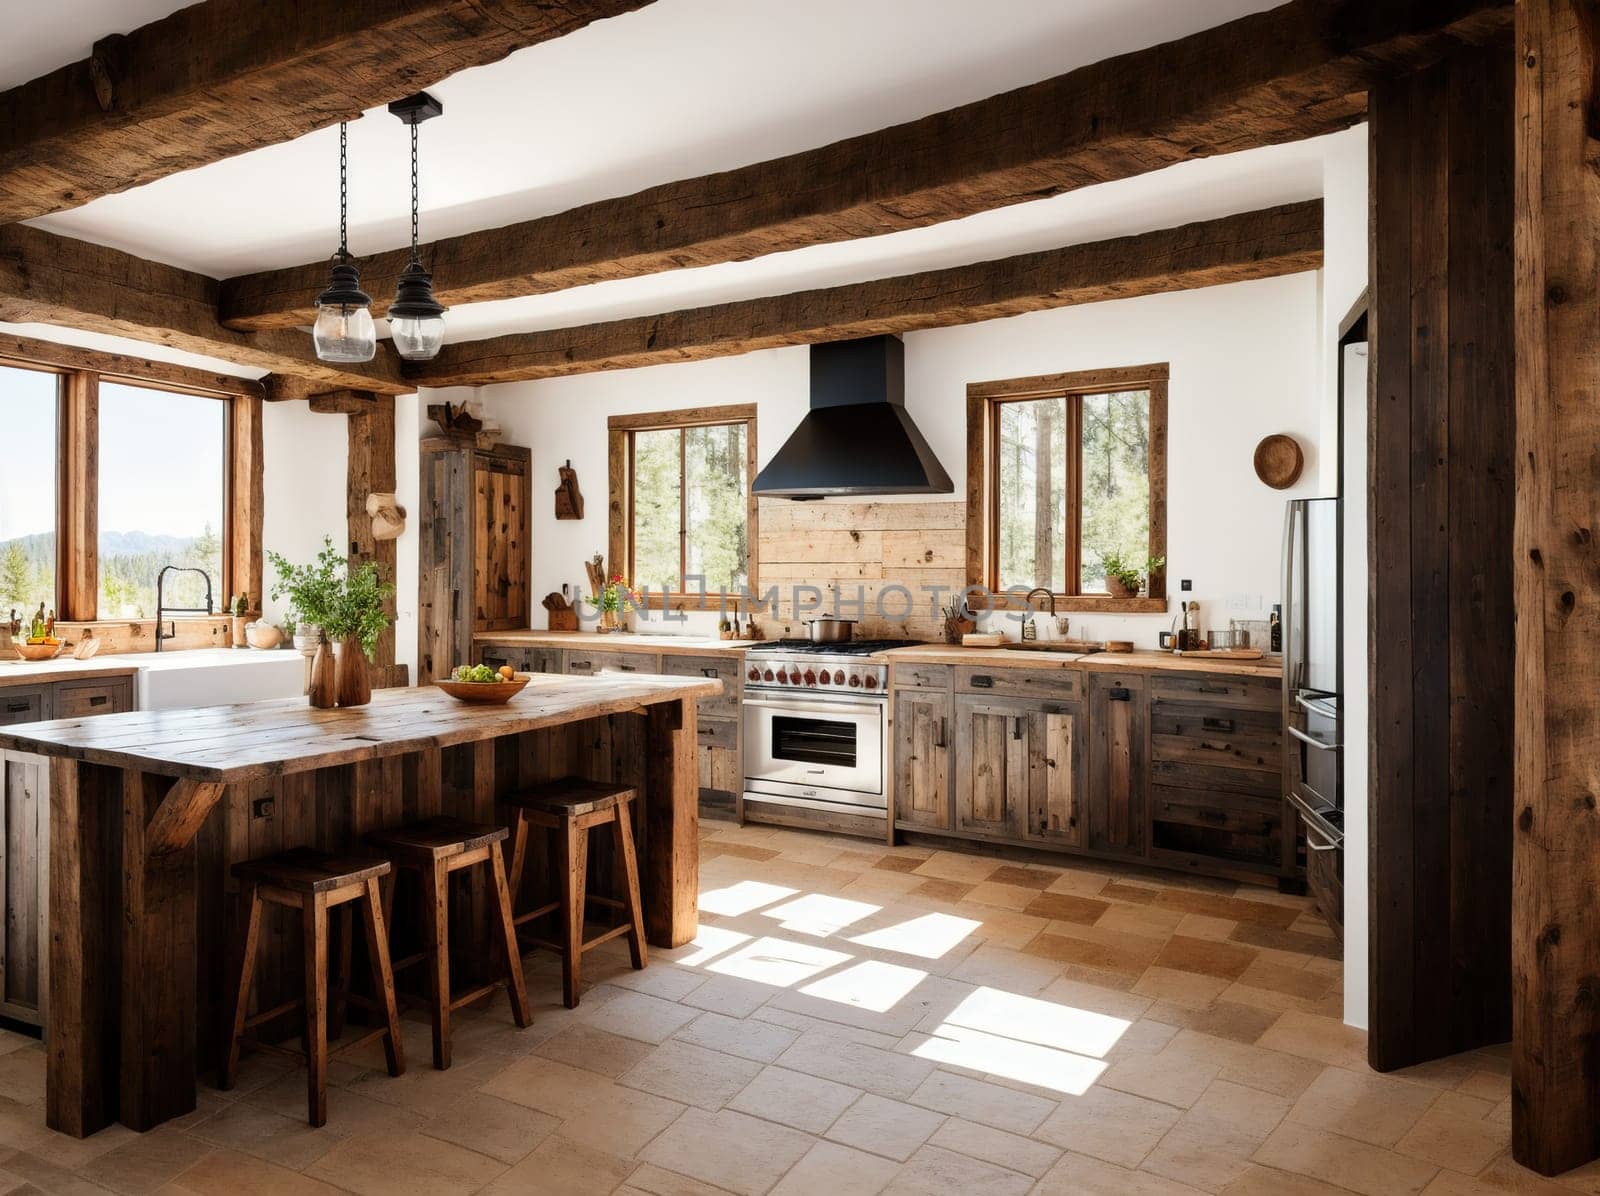 An image of a kitchen with wooden beams and a large wooden table in the center of the room. by creart